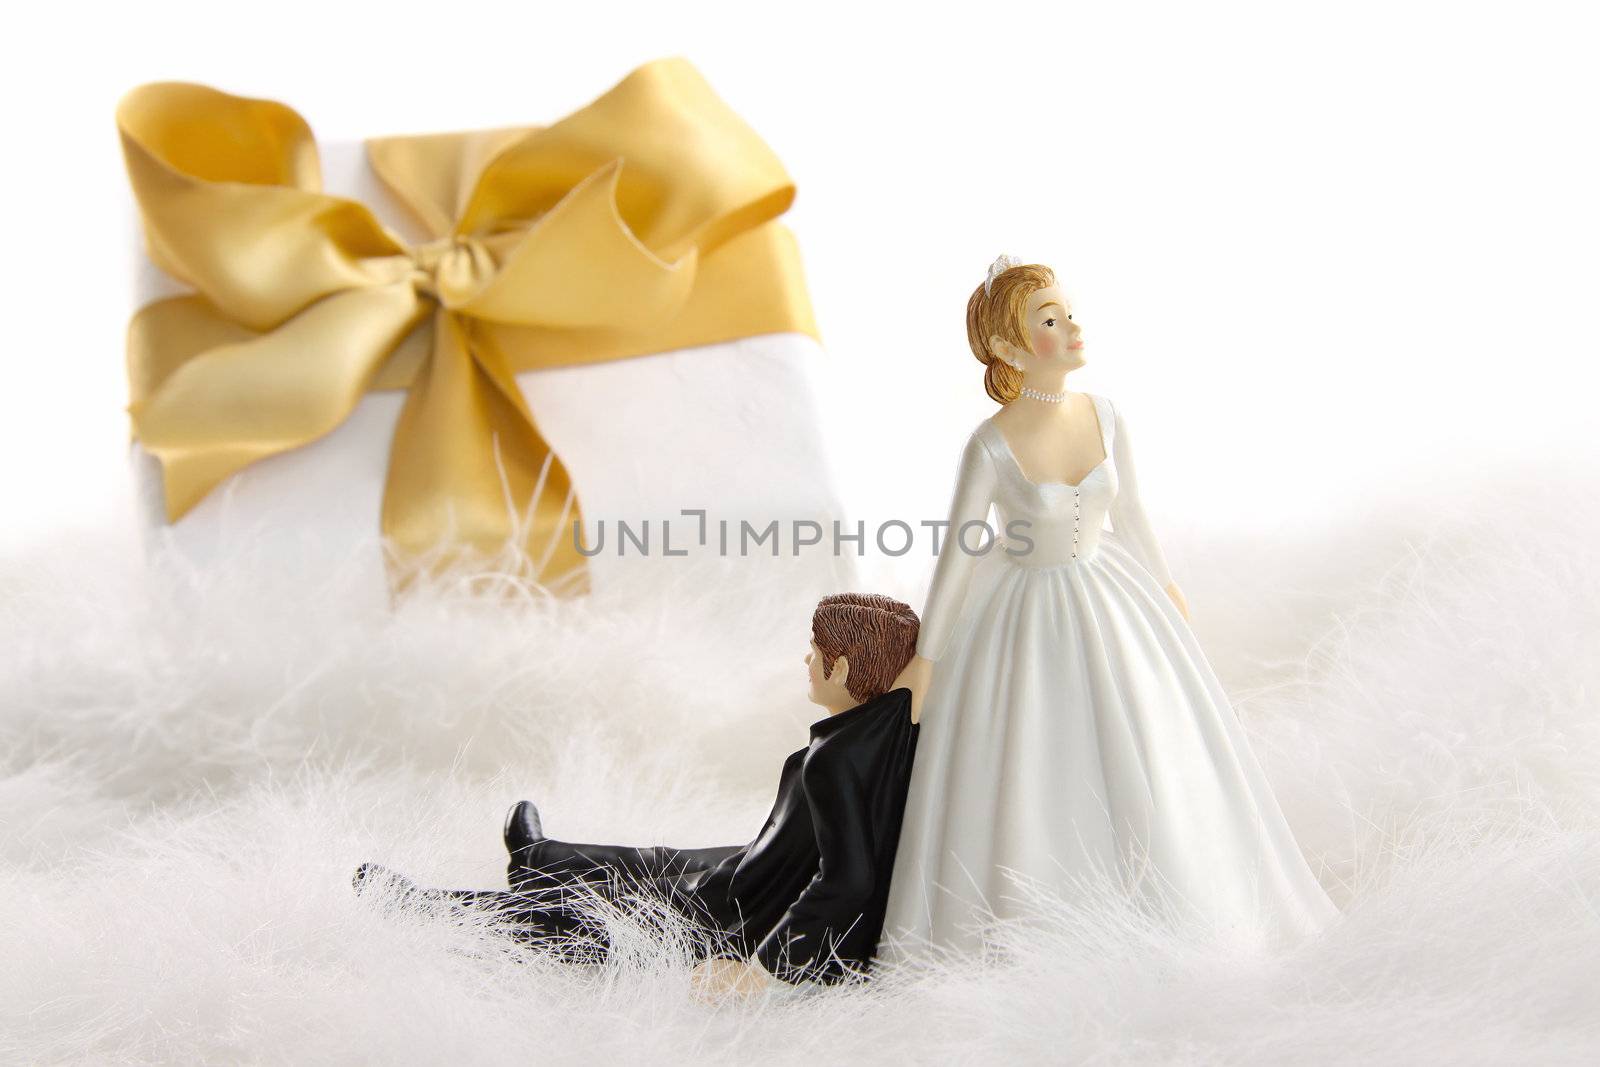 Wedding cake figurines with gift on white by Sandralise